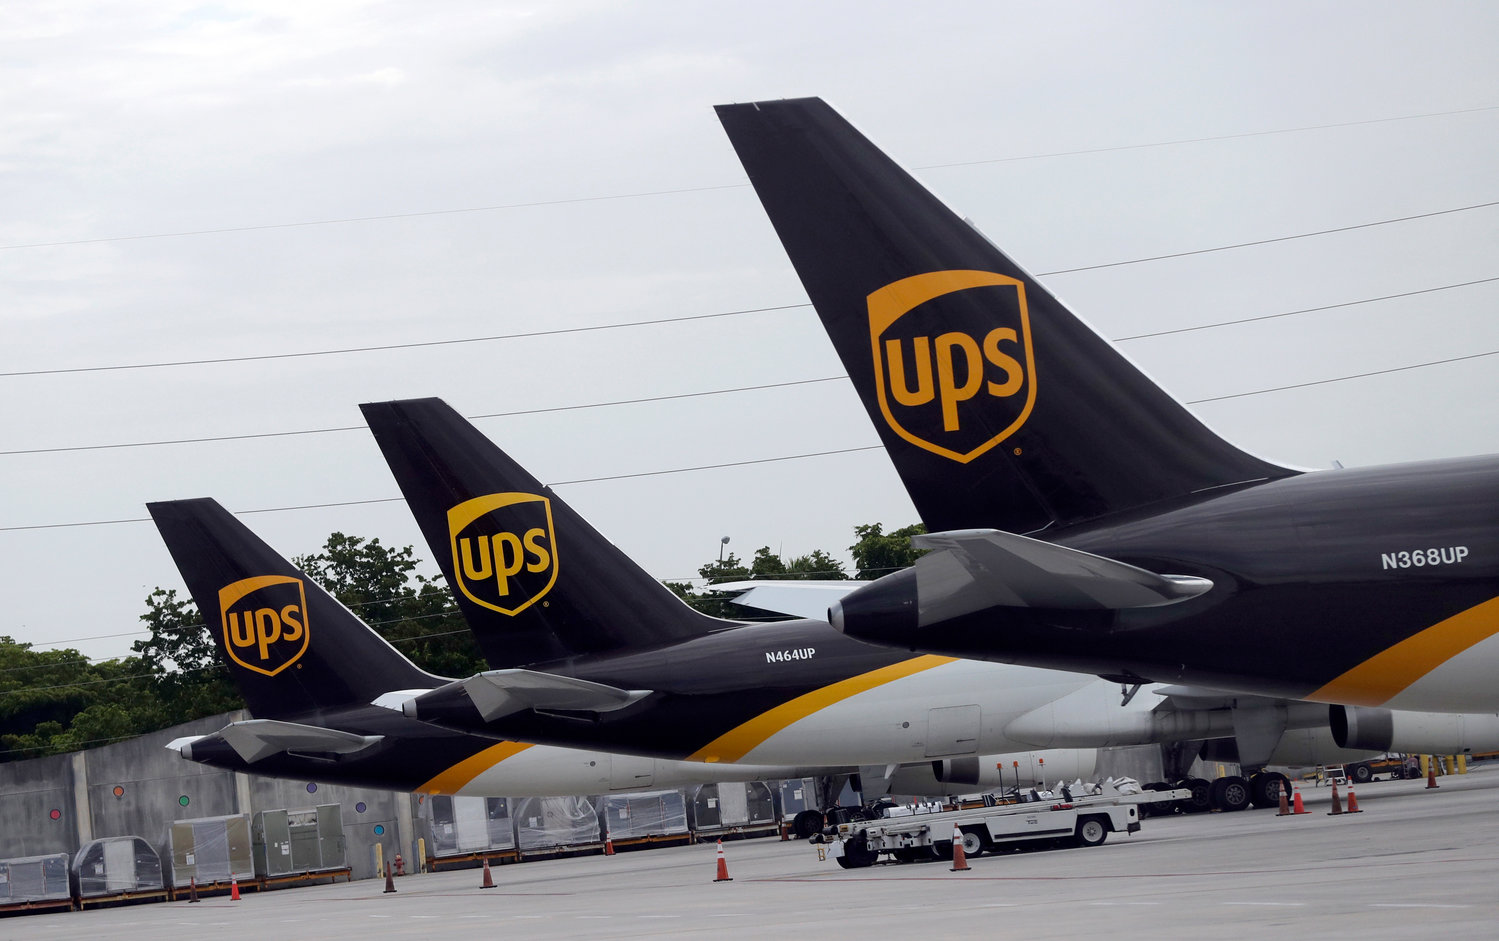 FILE - In this July 27, 2020 file photo, the tails of three UPS aircraft are shown parked at Miami International Airport in Miami. The nation‚Äôs major shipping companies are in the best shape to get holiday shoppers‚Äô packages delivered on time since the start of the pandemic, suggesting a return to normalcy. (AP Photo/Wilfredo Lee, File)